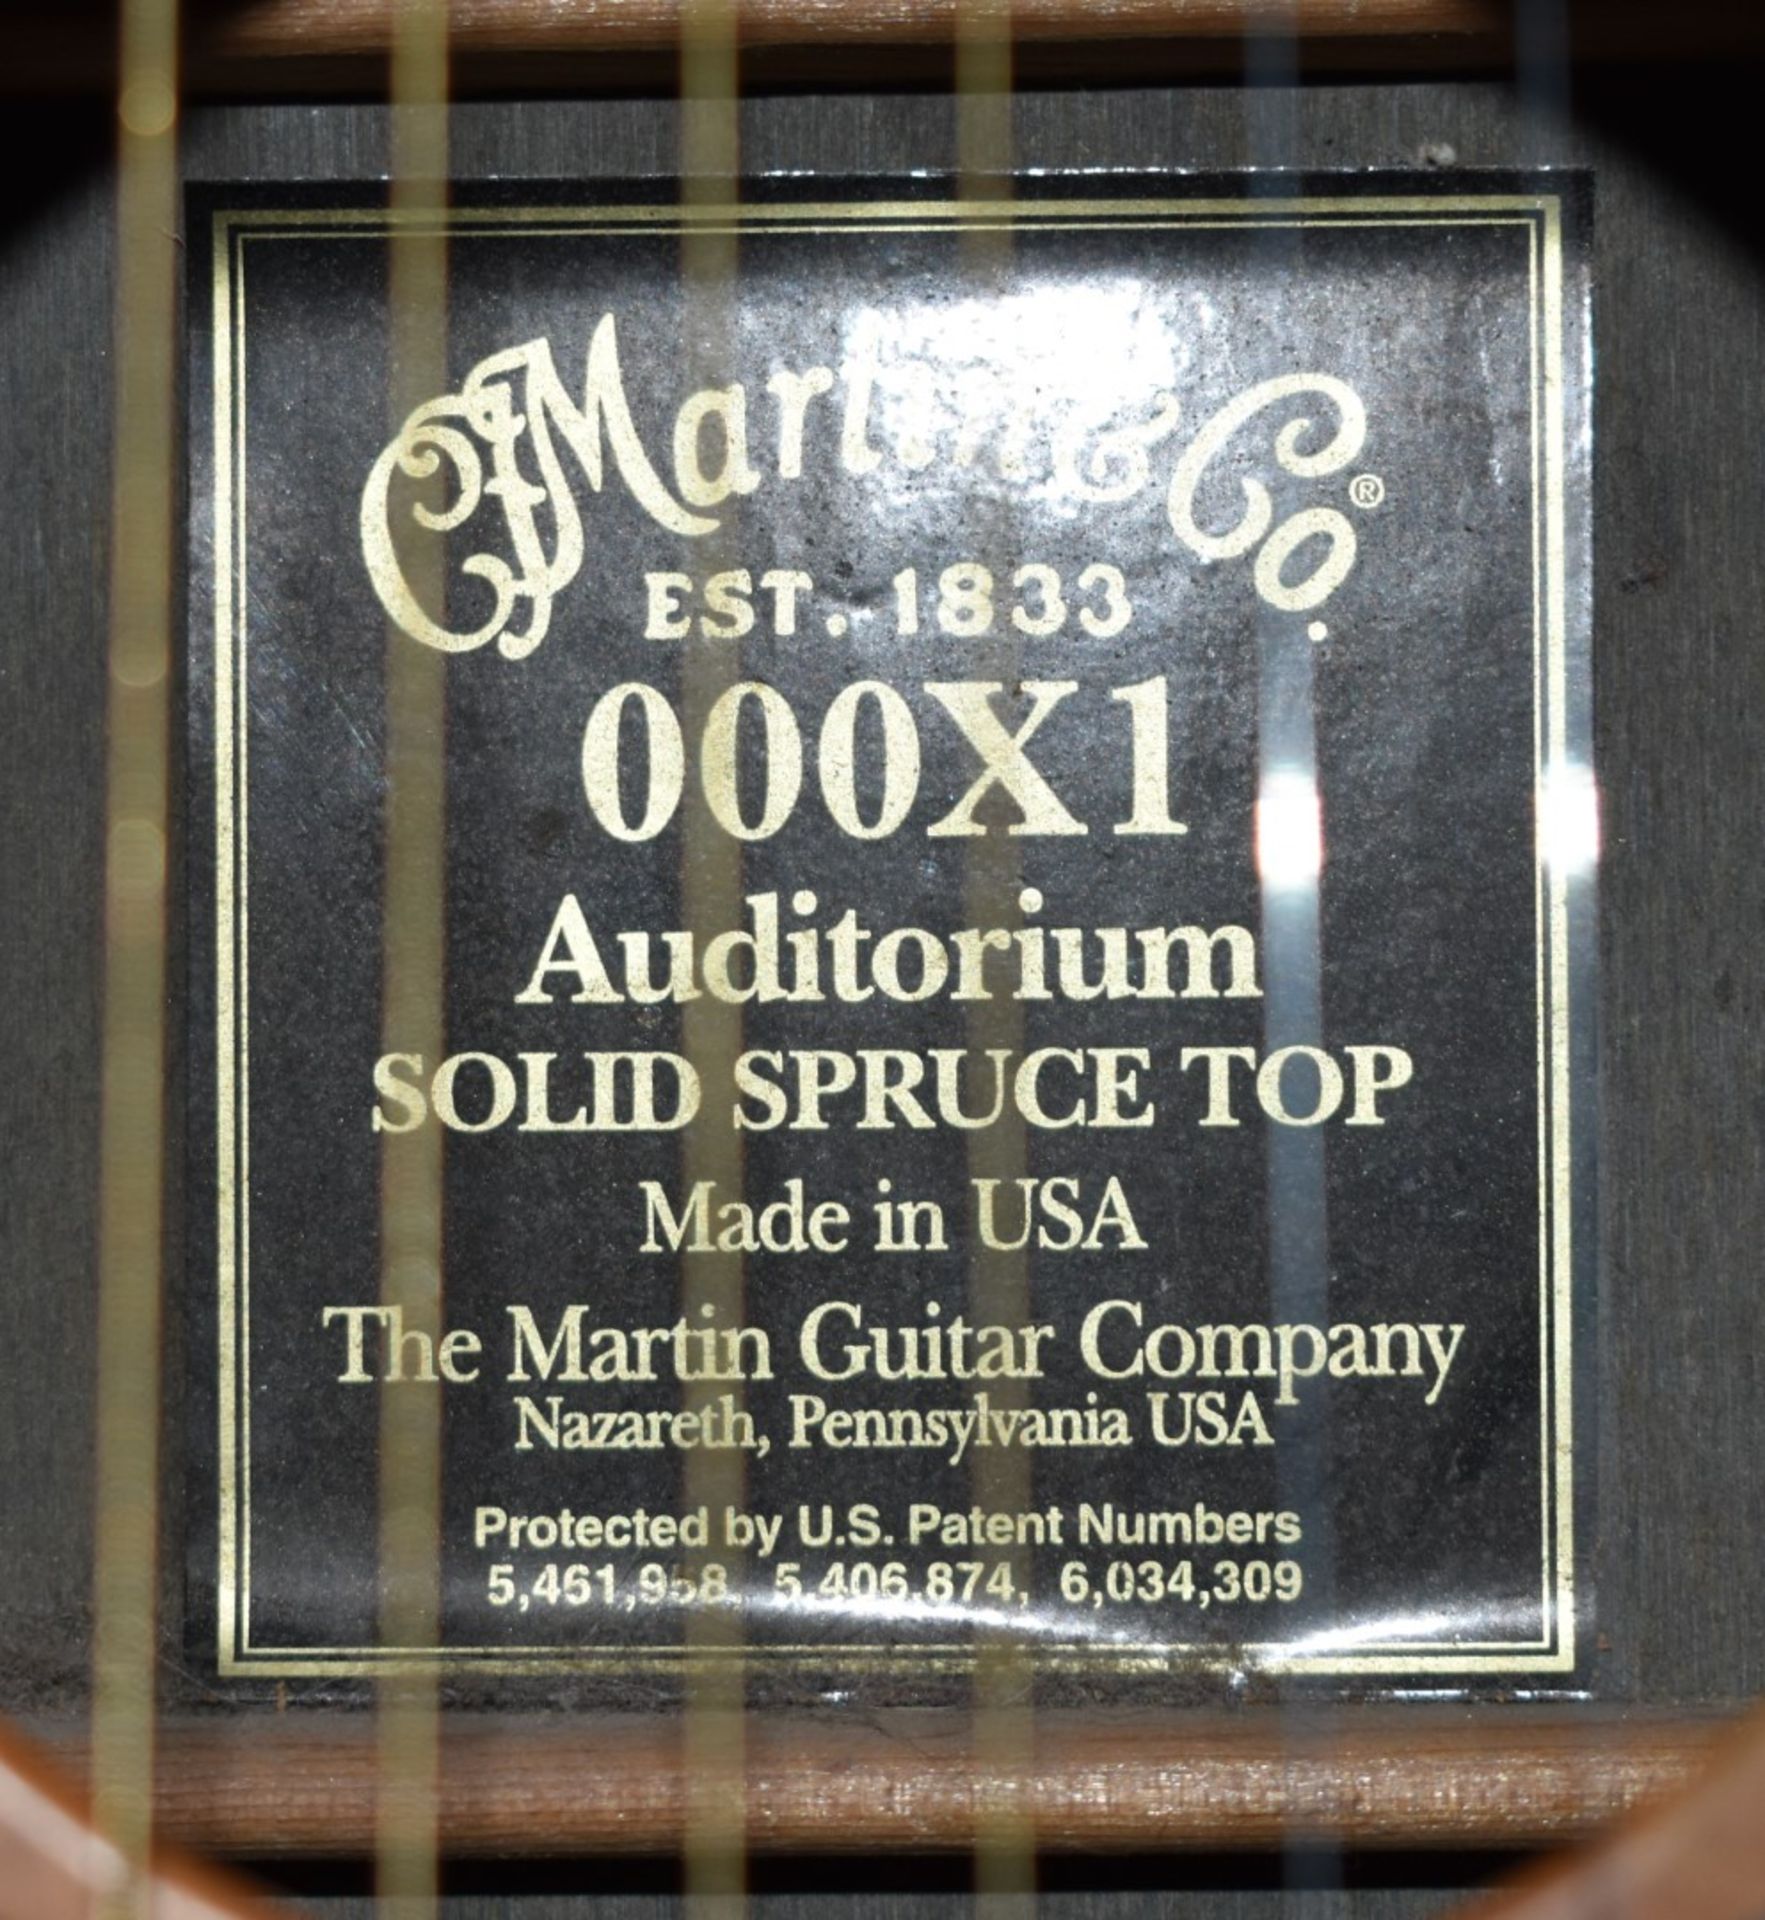 1 x Martin 2003 Auditorium Solid Spruce Top Acoustic Guitar - Model 000X1 - NO VAT ON THE HAMMER! - Image 9 of 10